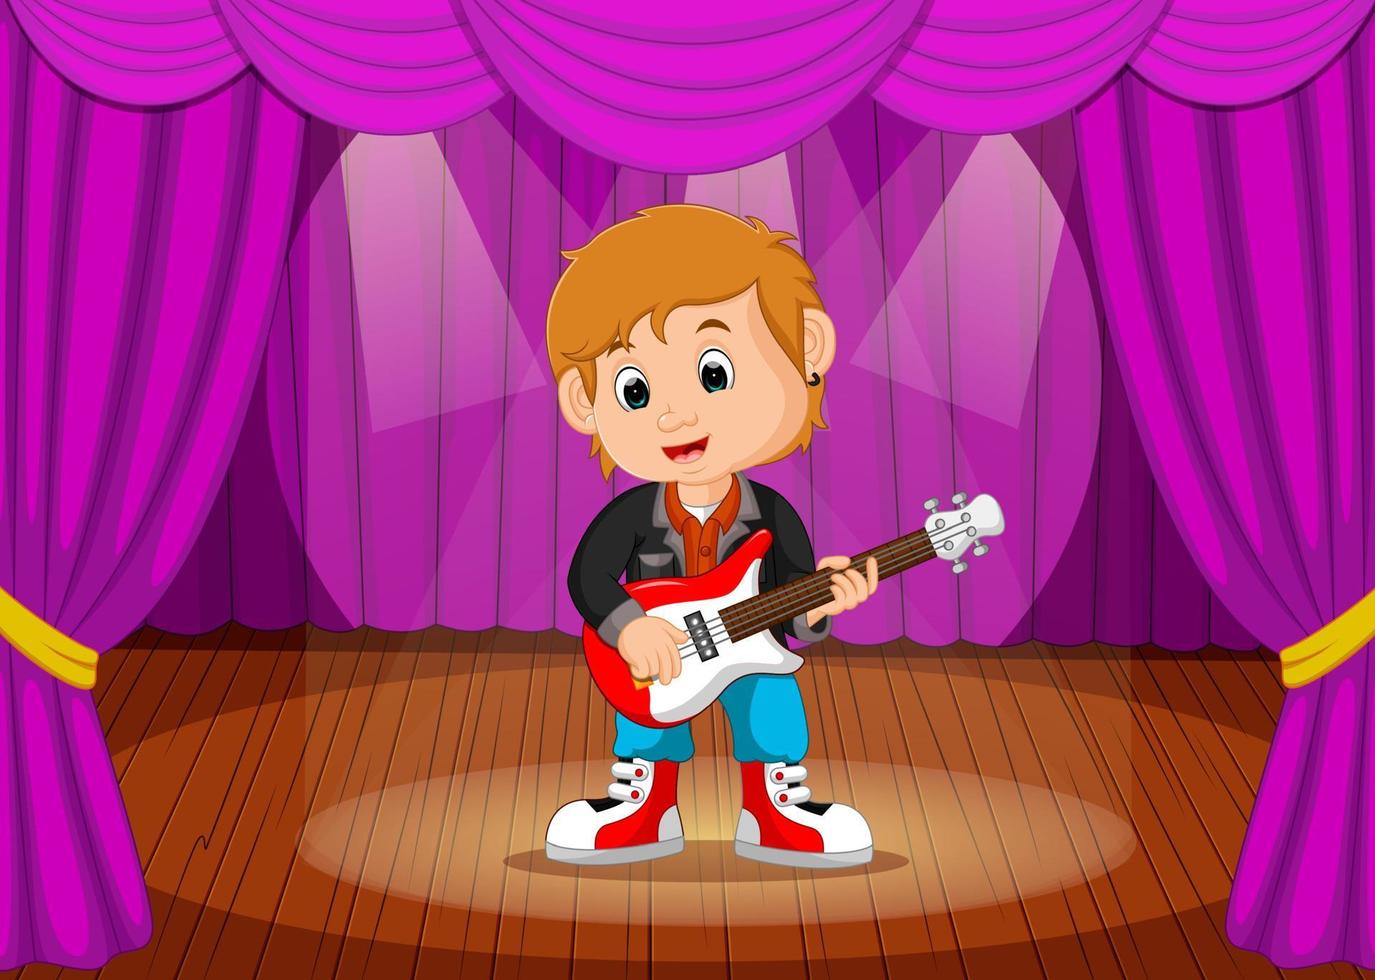 Young boy playing Electric guitar on stage vector